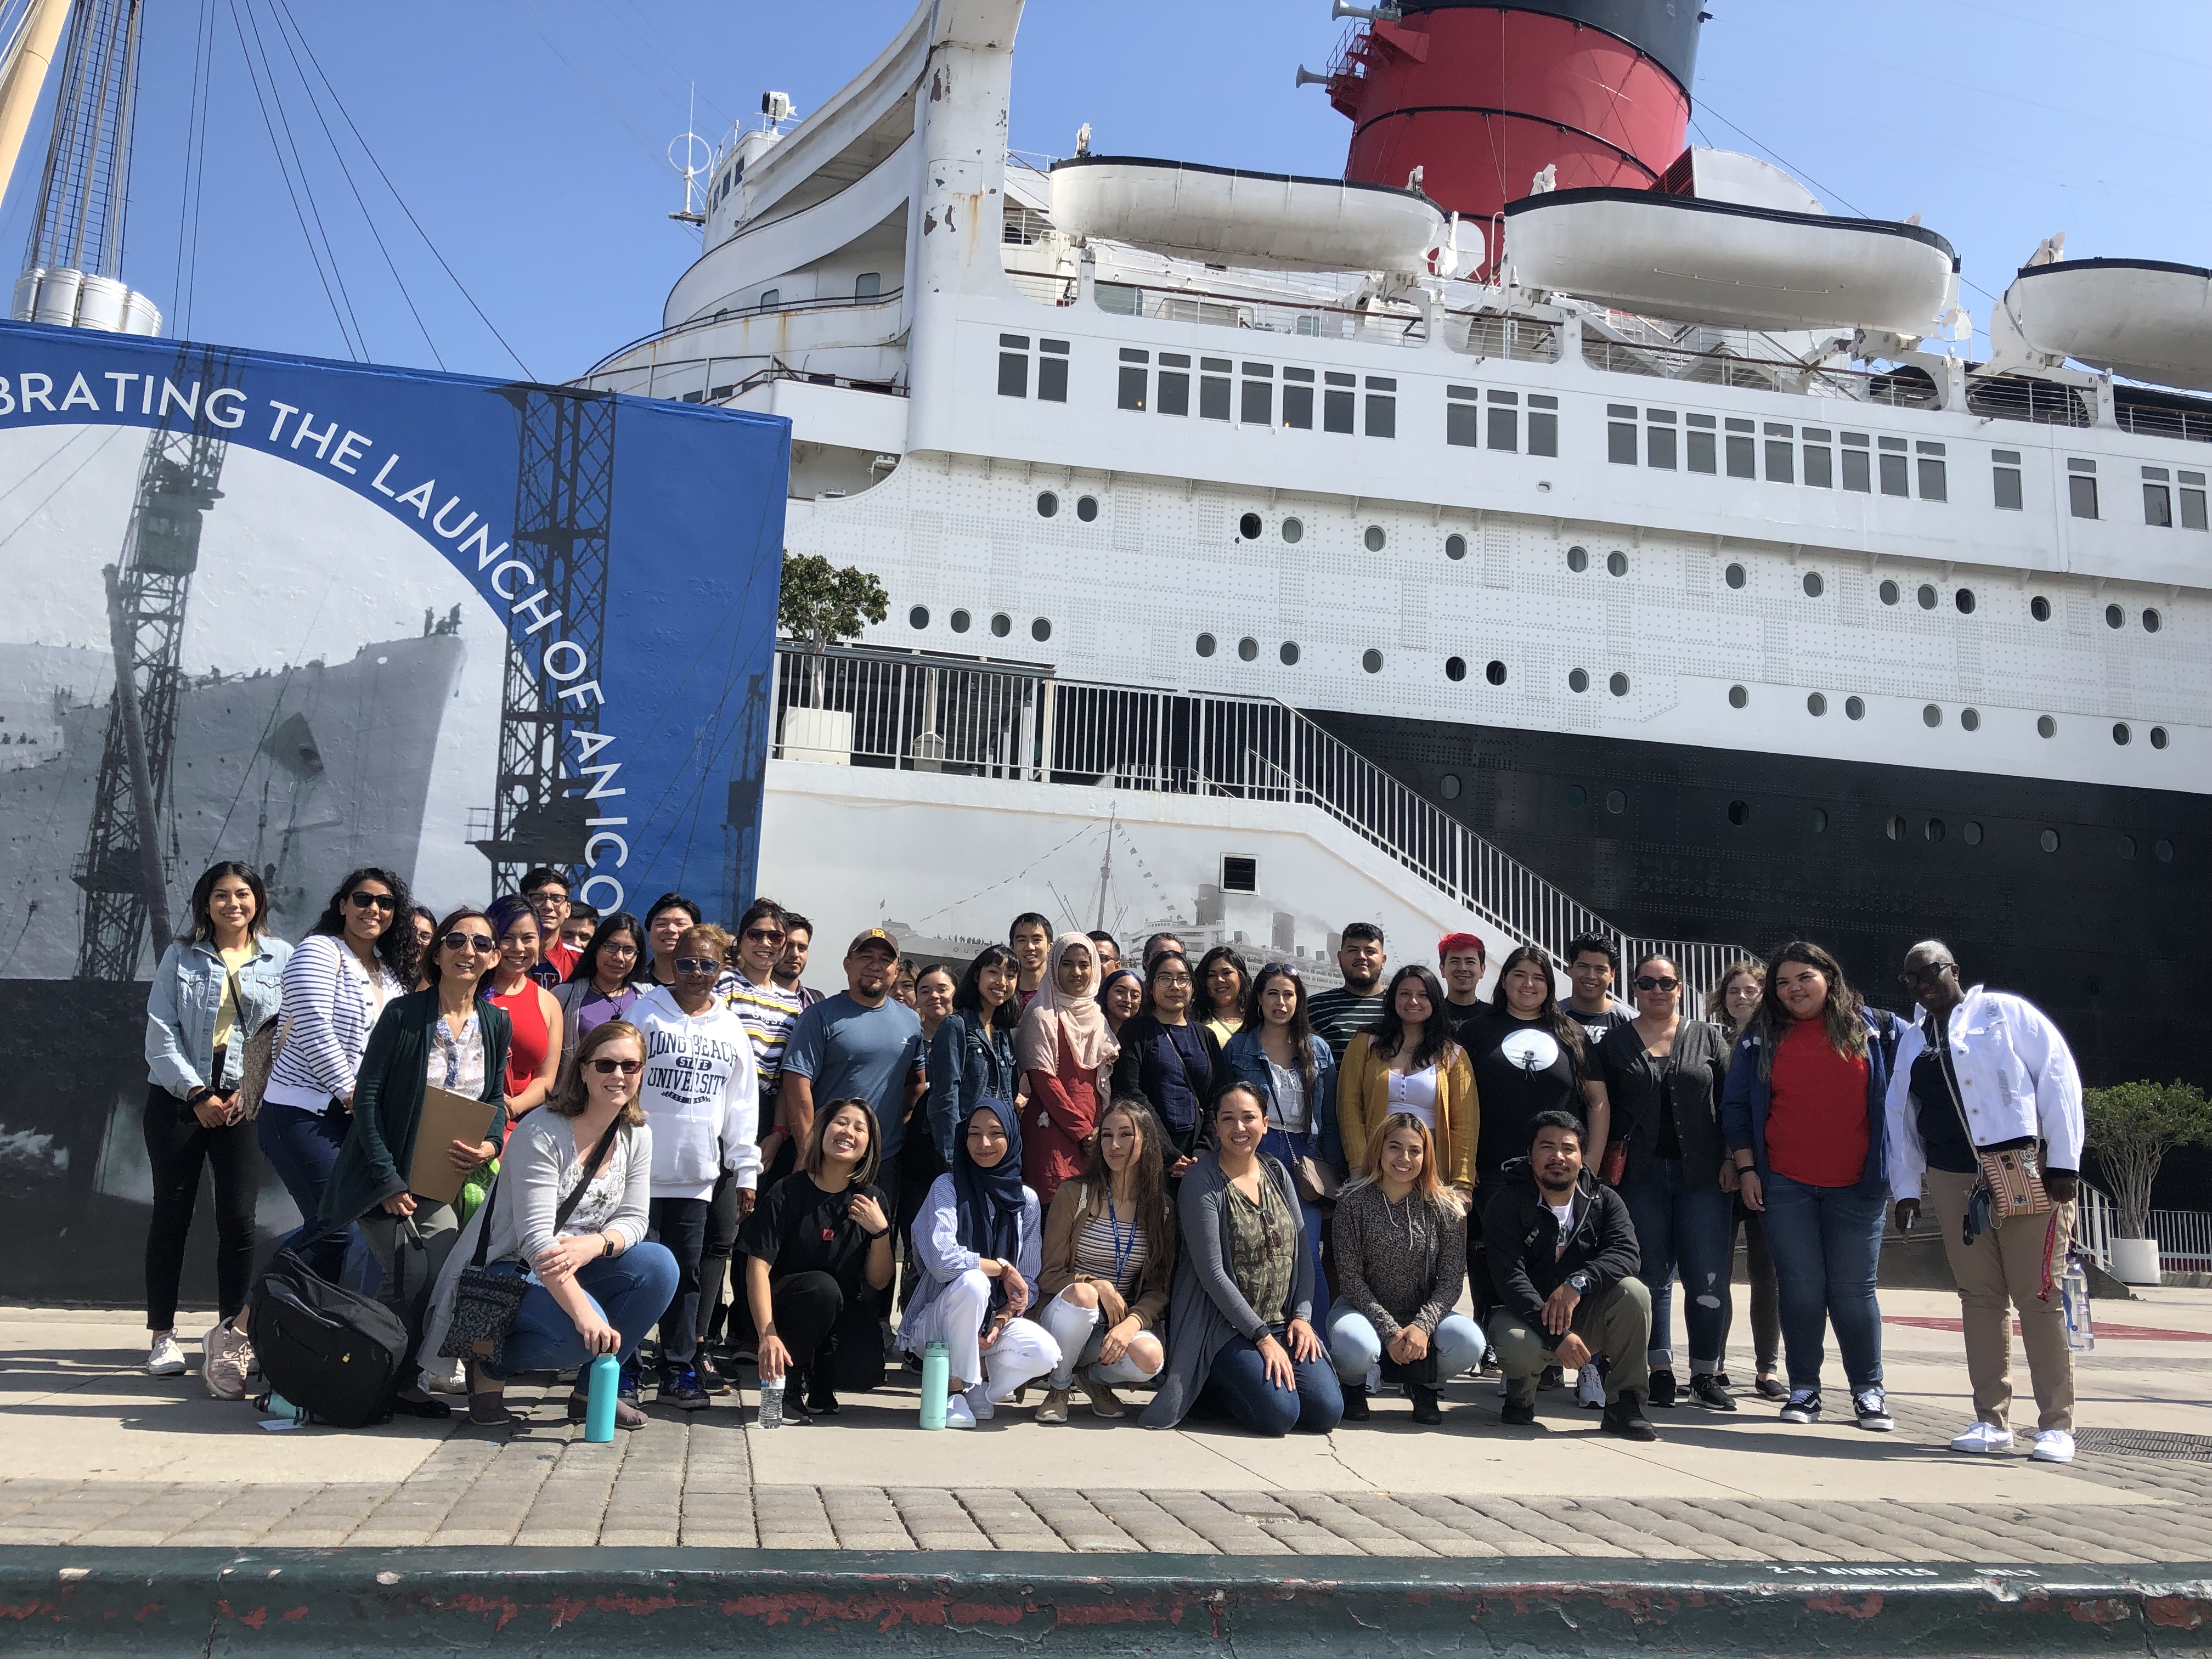 Group photo of SSS students in front of Queen Mary